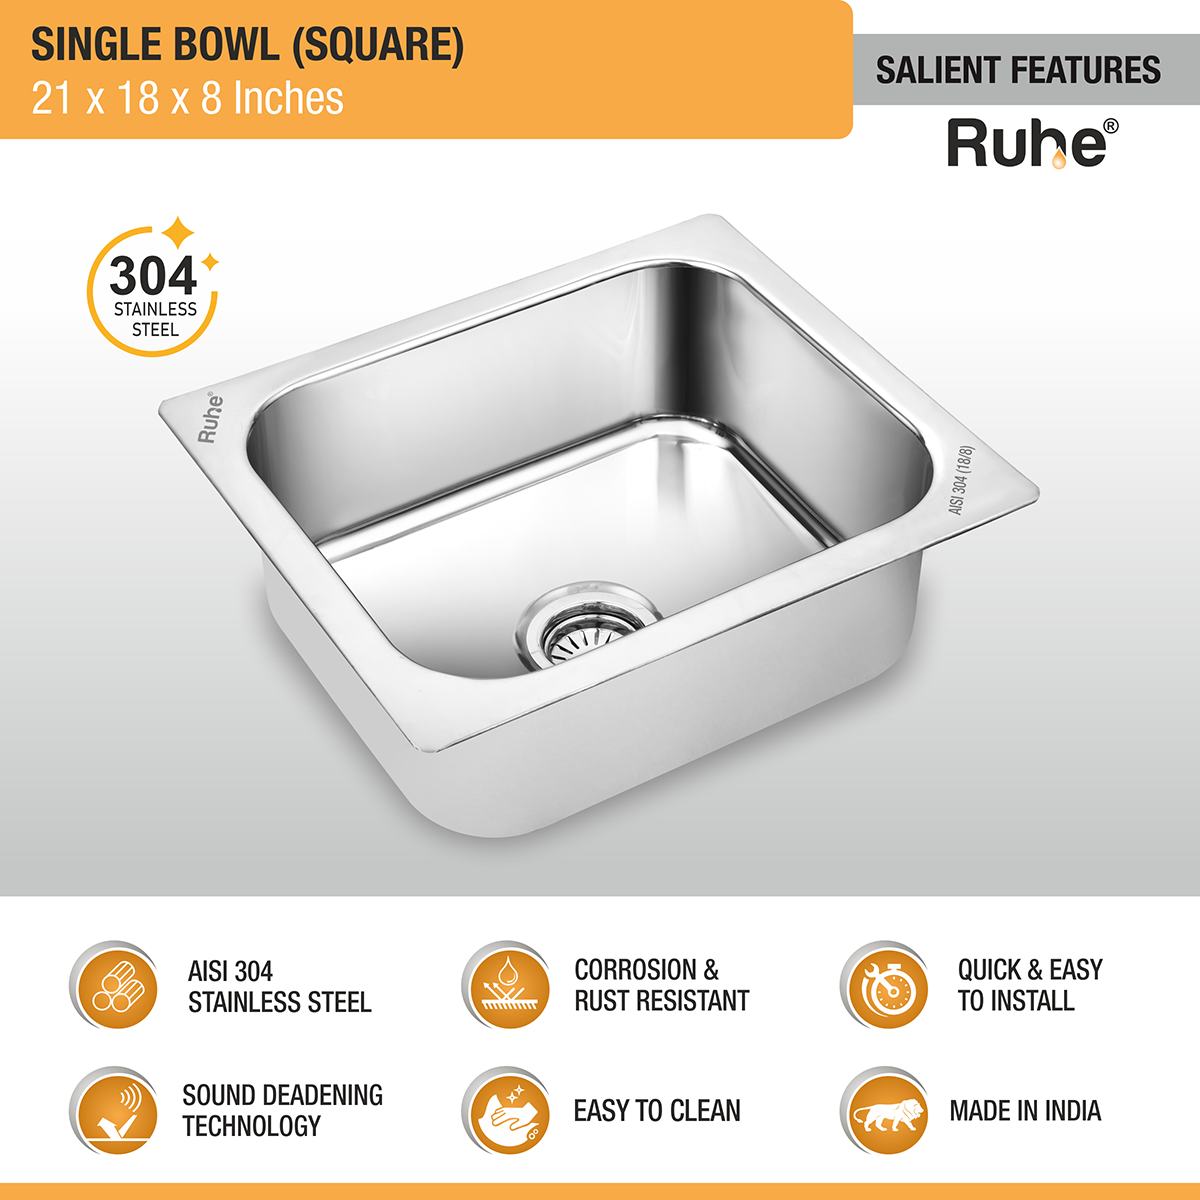 Square Single Bowl (21 x 18 x 8 inches) 304-Grade Kitchen Sink features and benefits